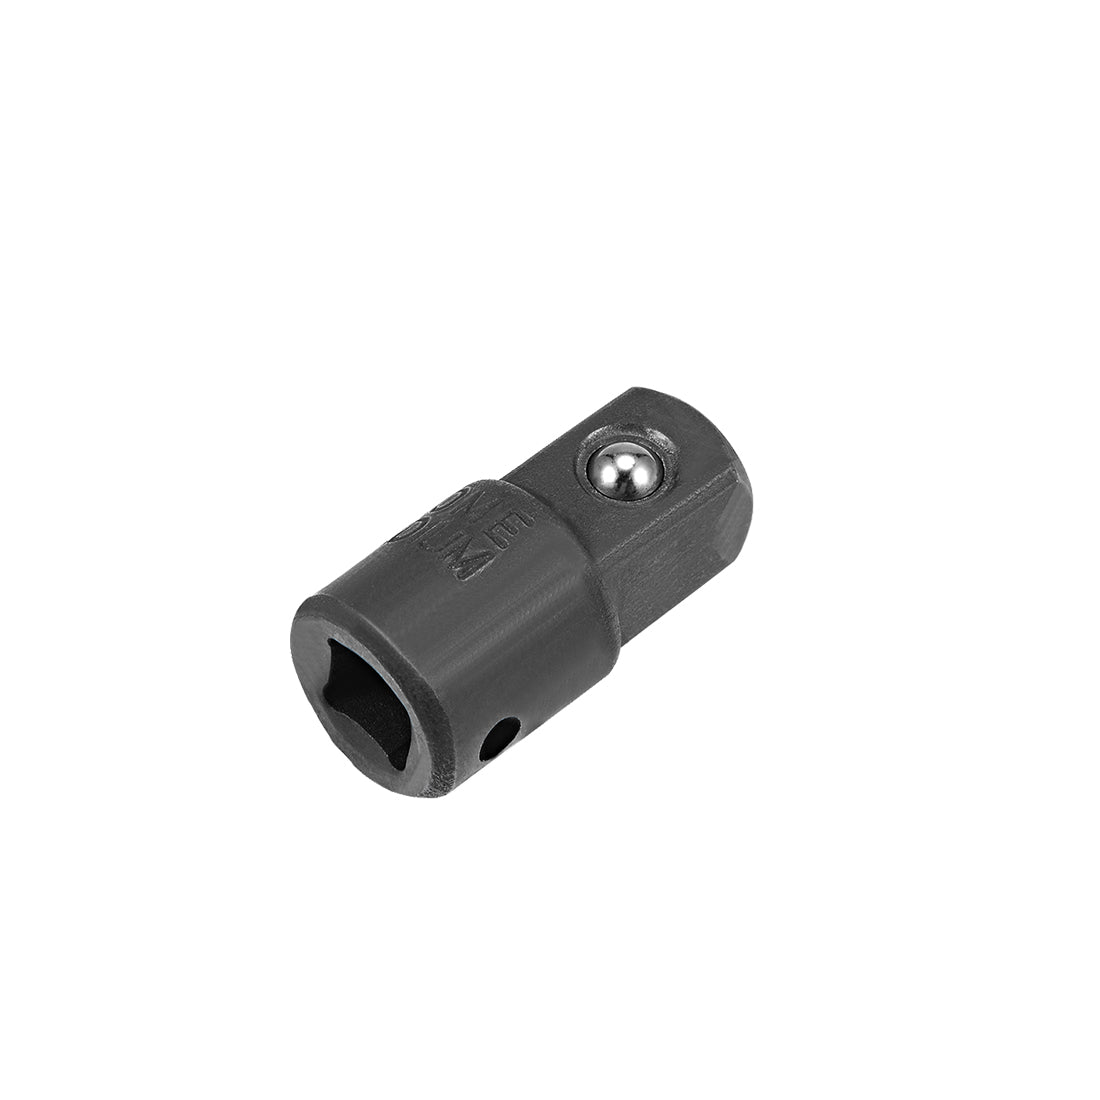 uxcell Uxcell 1/4 Inch Drive (F) x 3/8 Inch (M) Socket Adapter, Female to Male, Cr-V (Black)